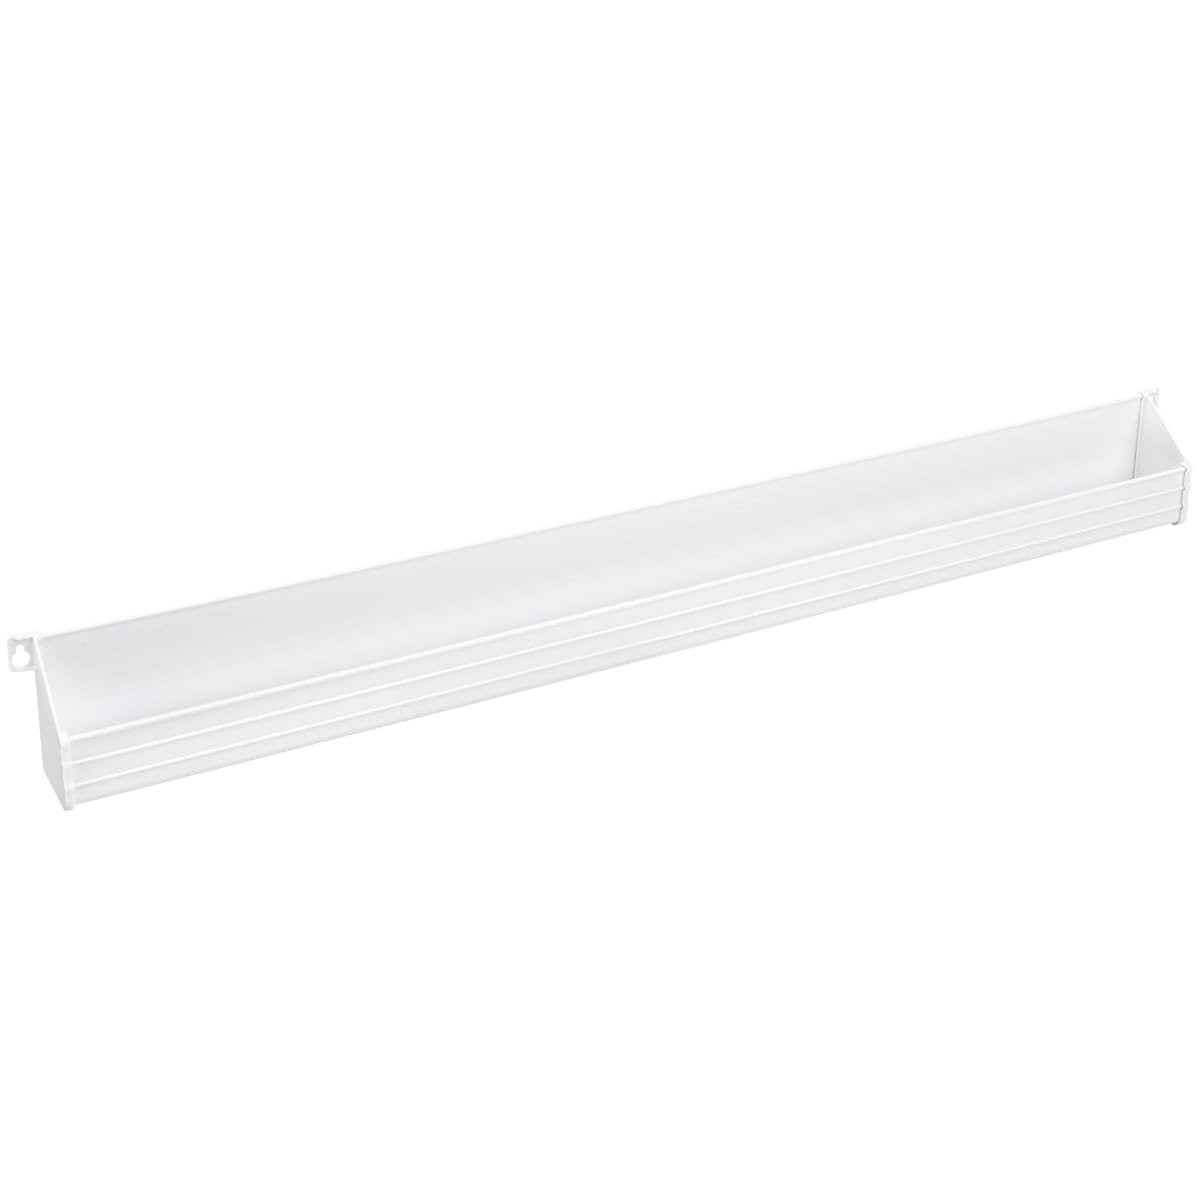 6551 Series Tip Out Tray 36 inch White 